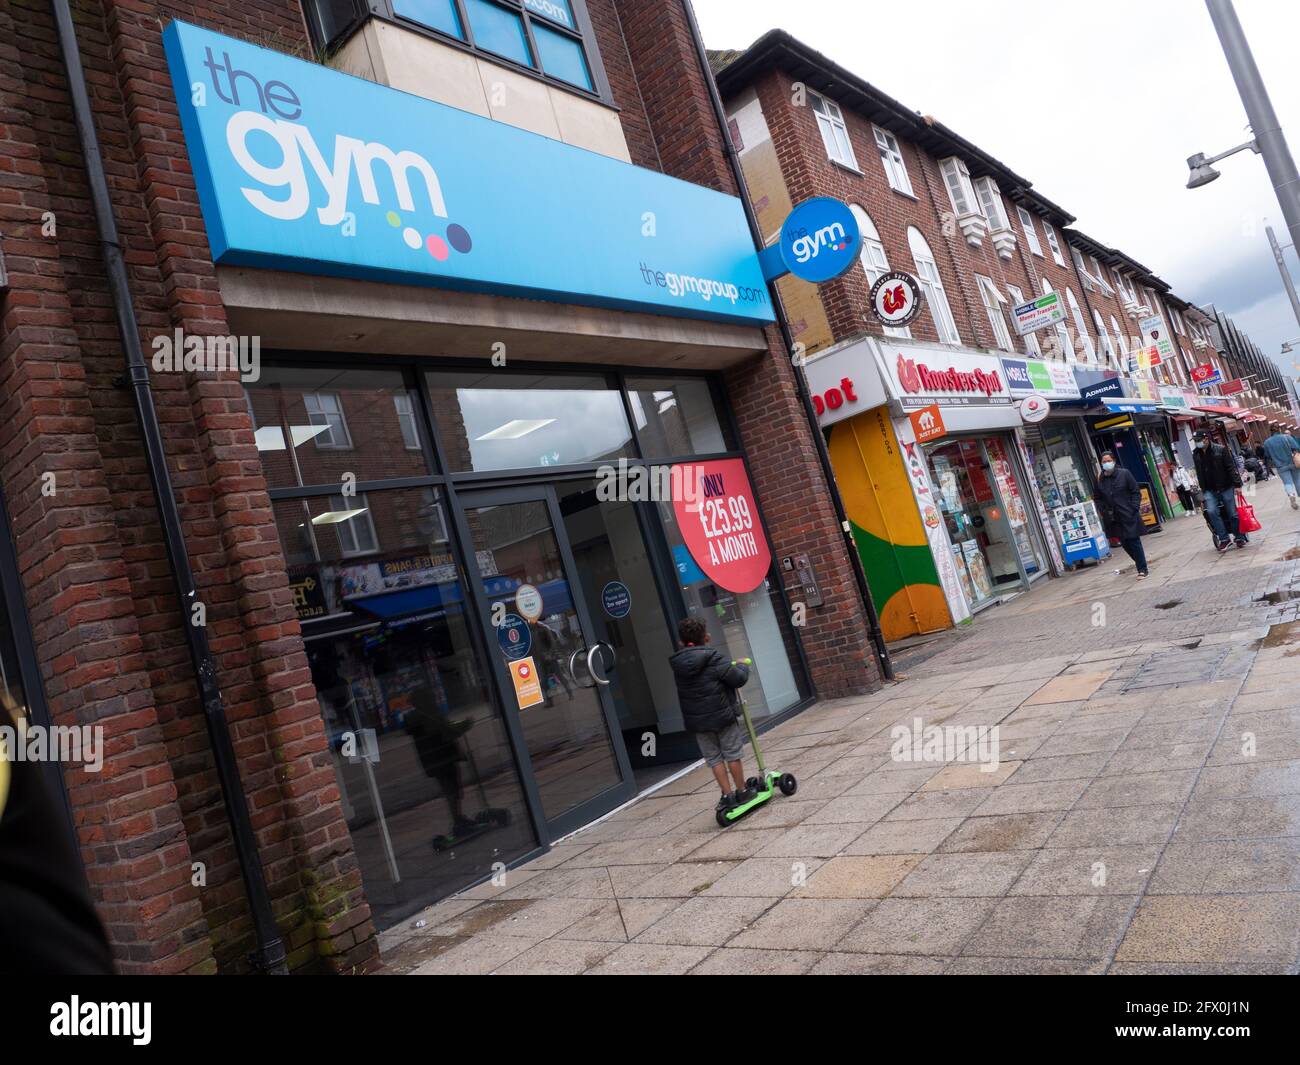 The Gym Group premises Walthamstow High Street, London, with child riding past on scooter Stock Photo